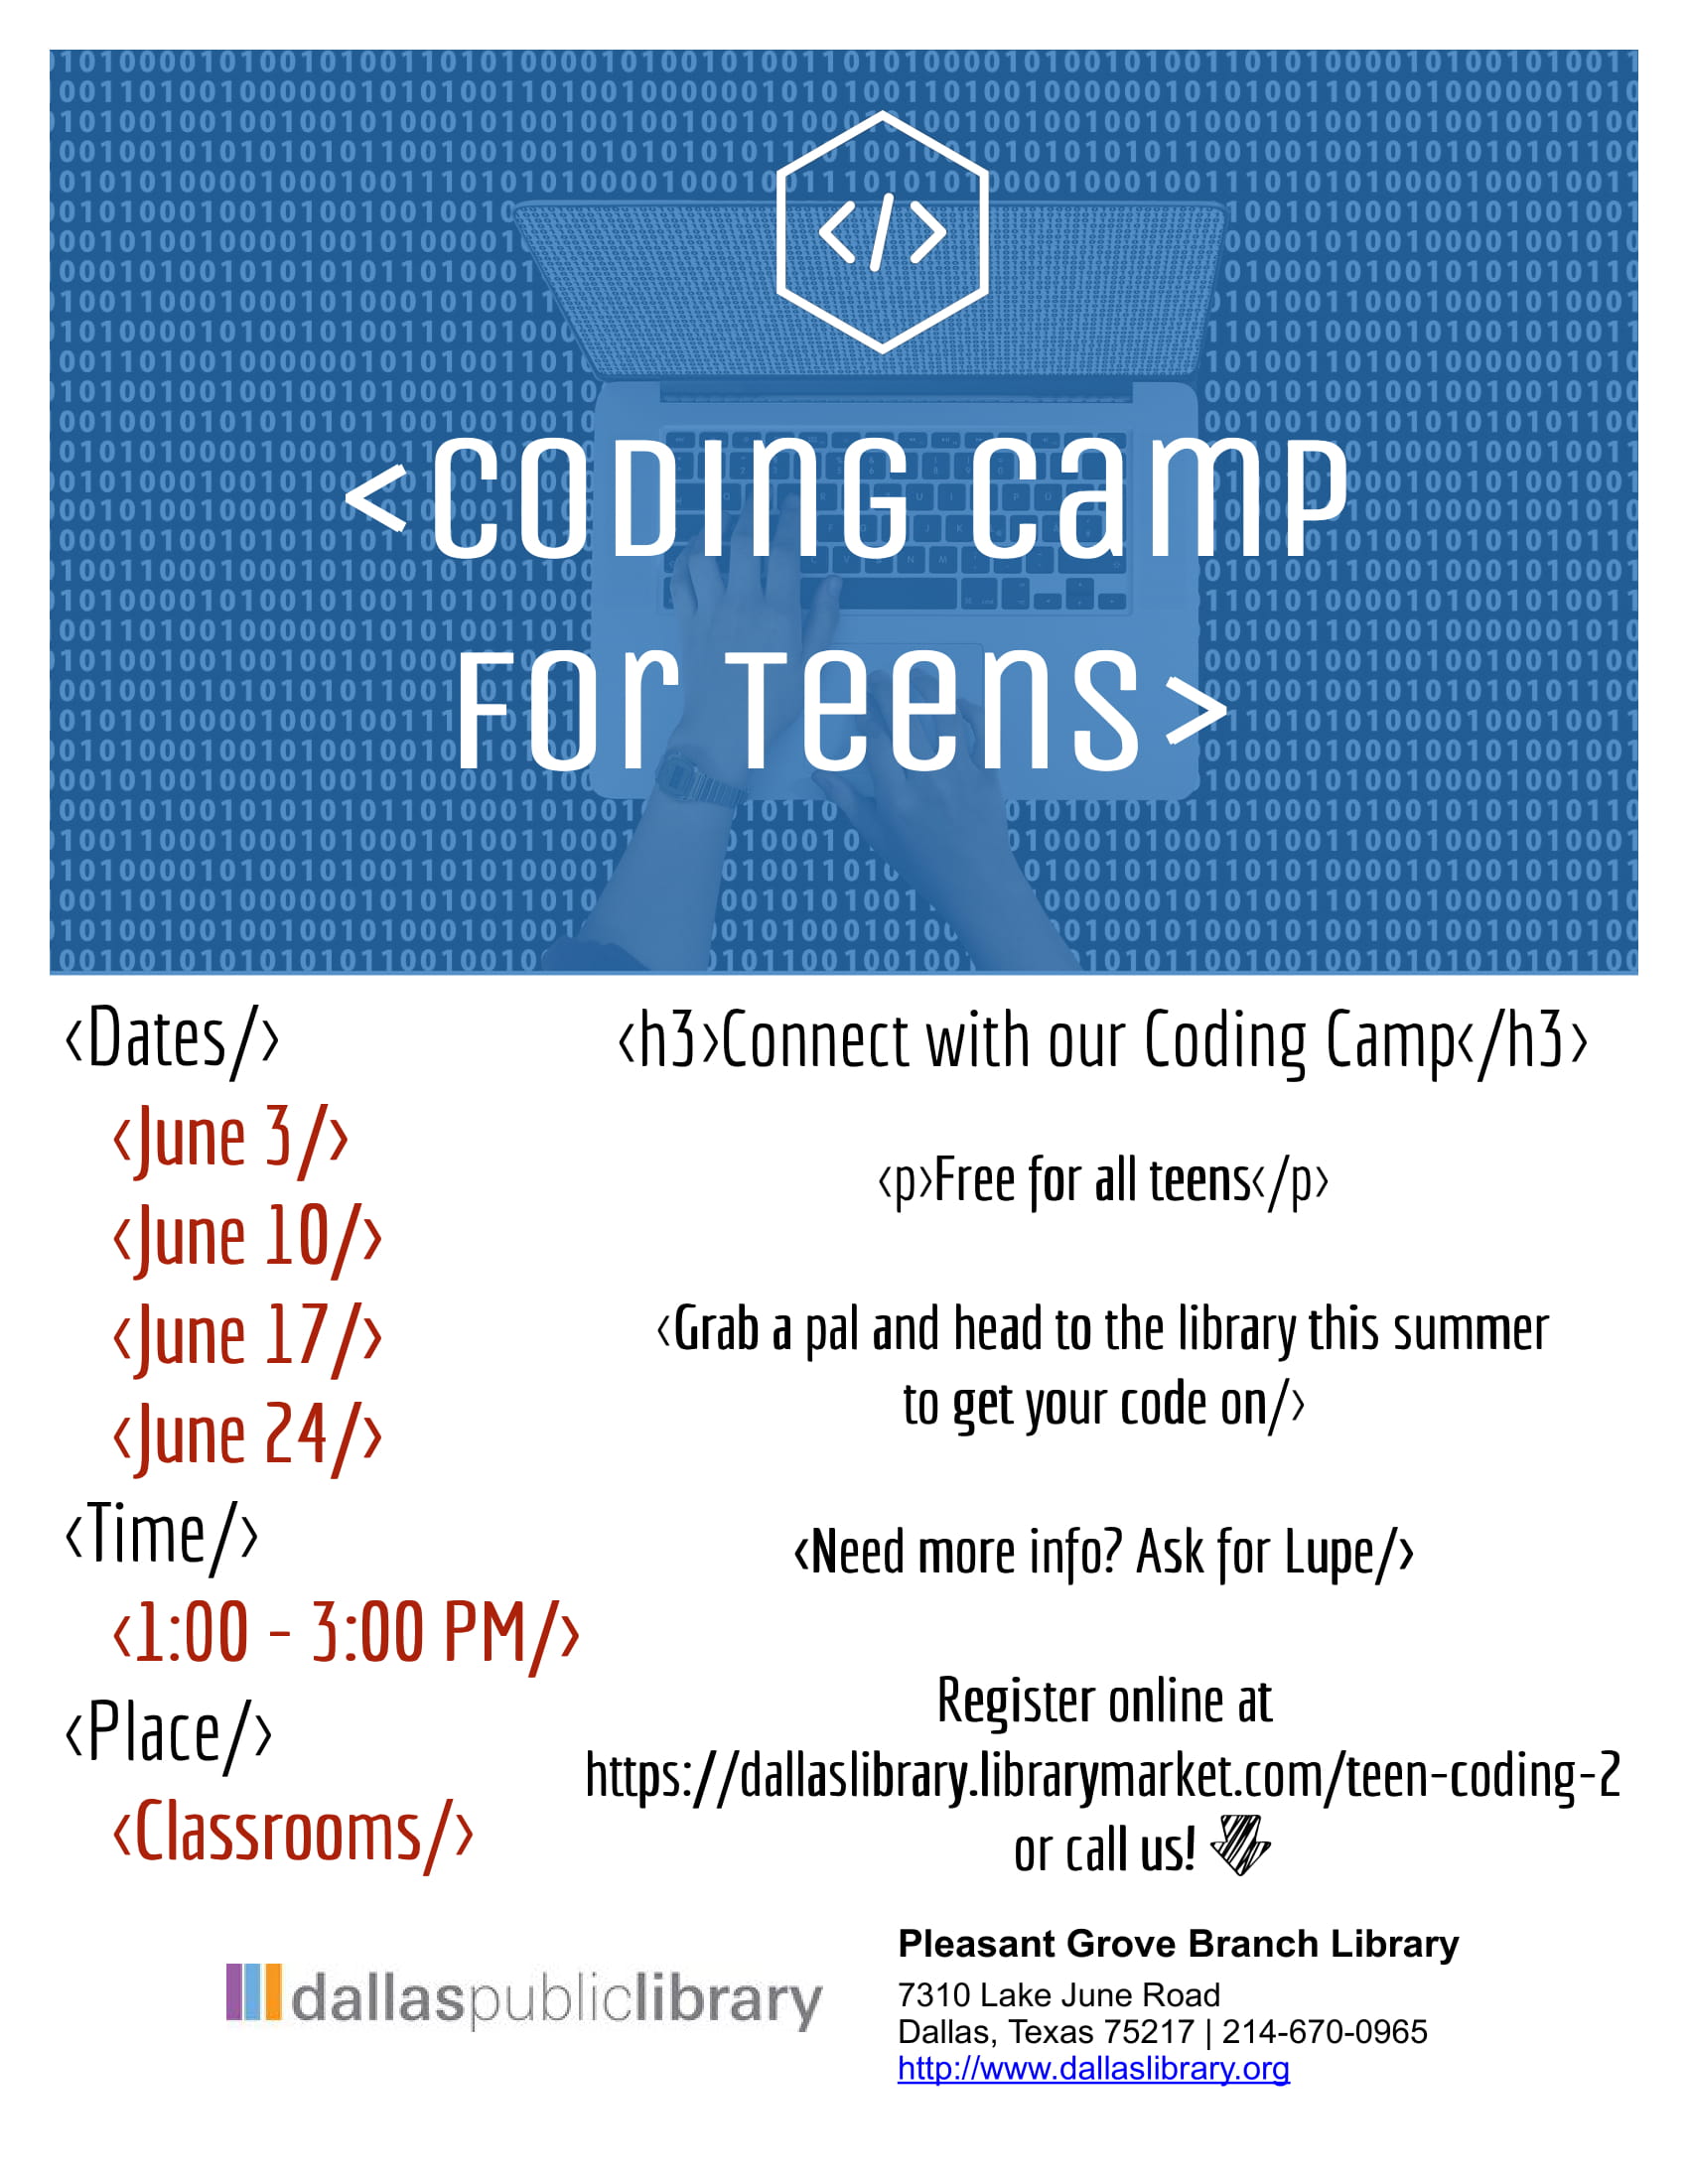 This is a flyer about the coding camp (for teens)